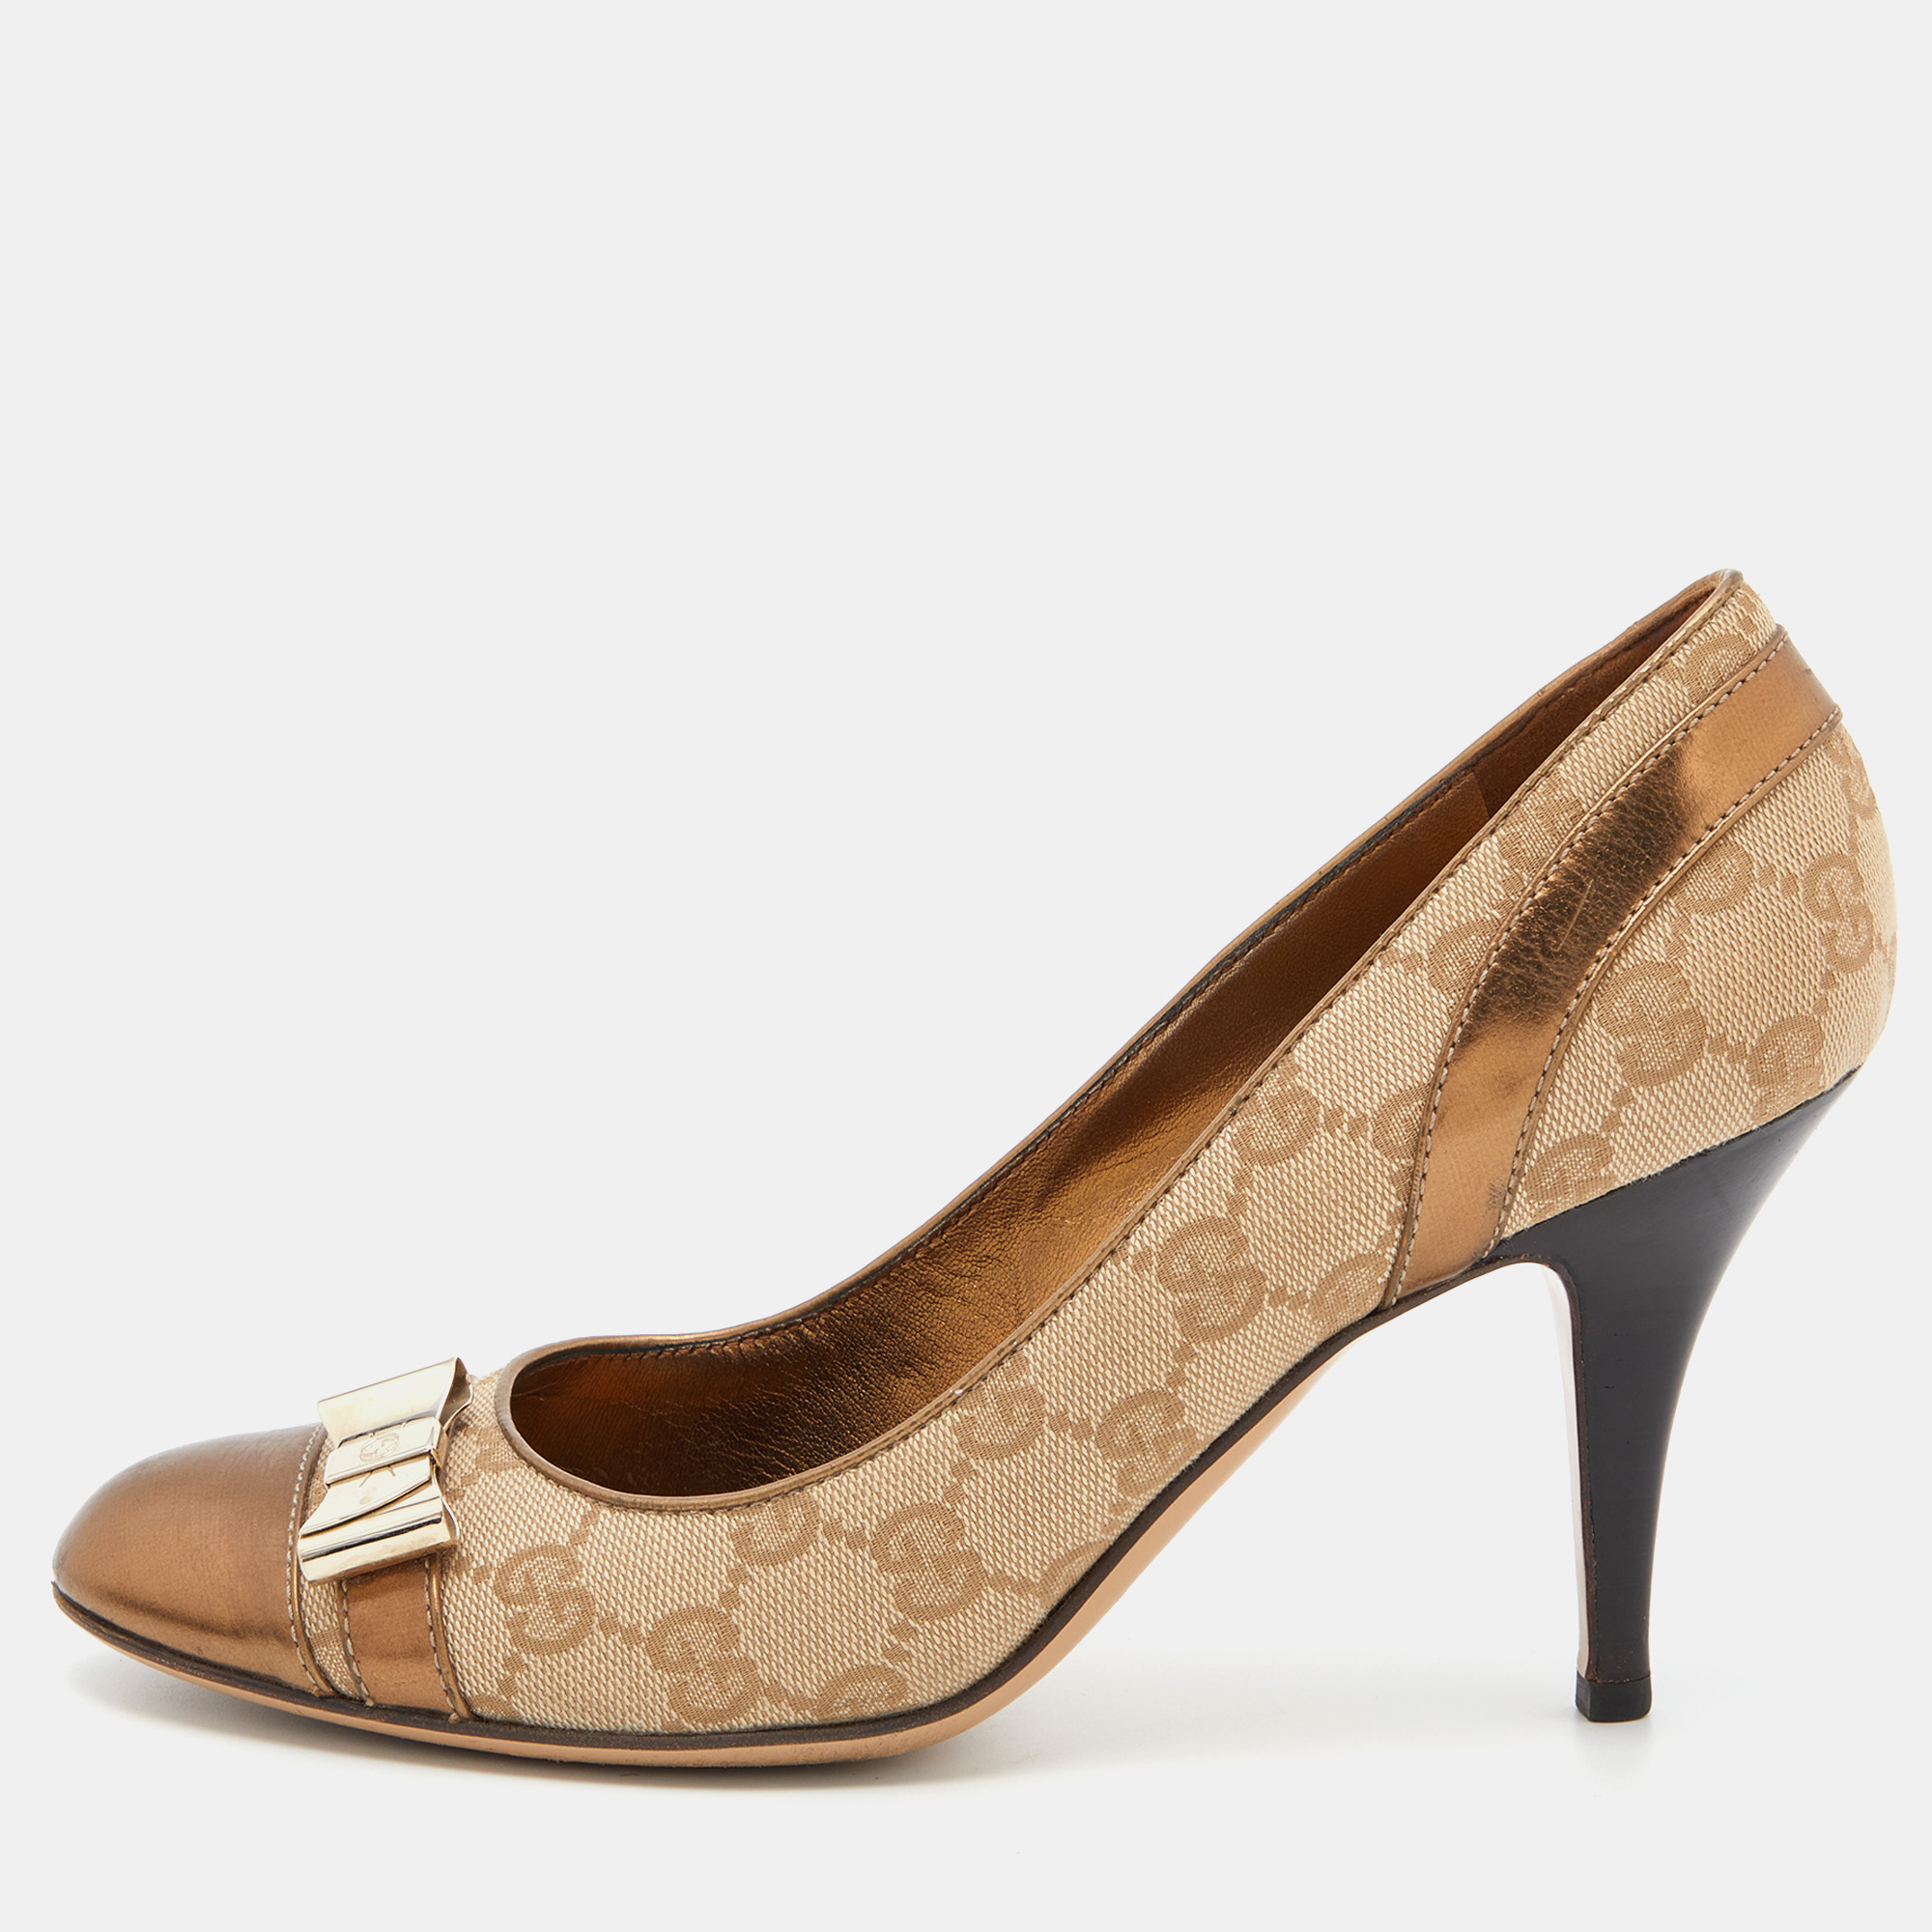 Gucci brown/beige gg canvas and leather bow pumps size 39